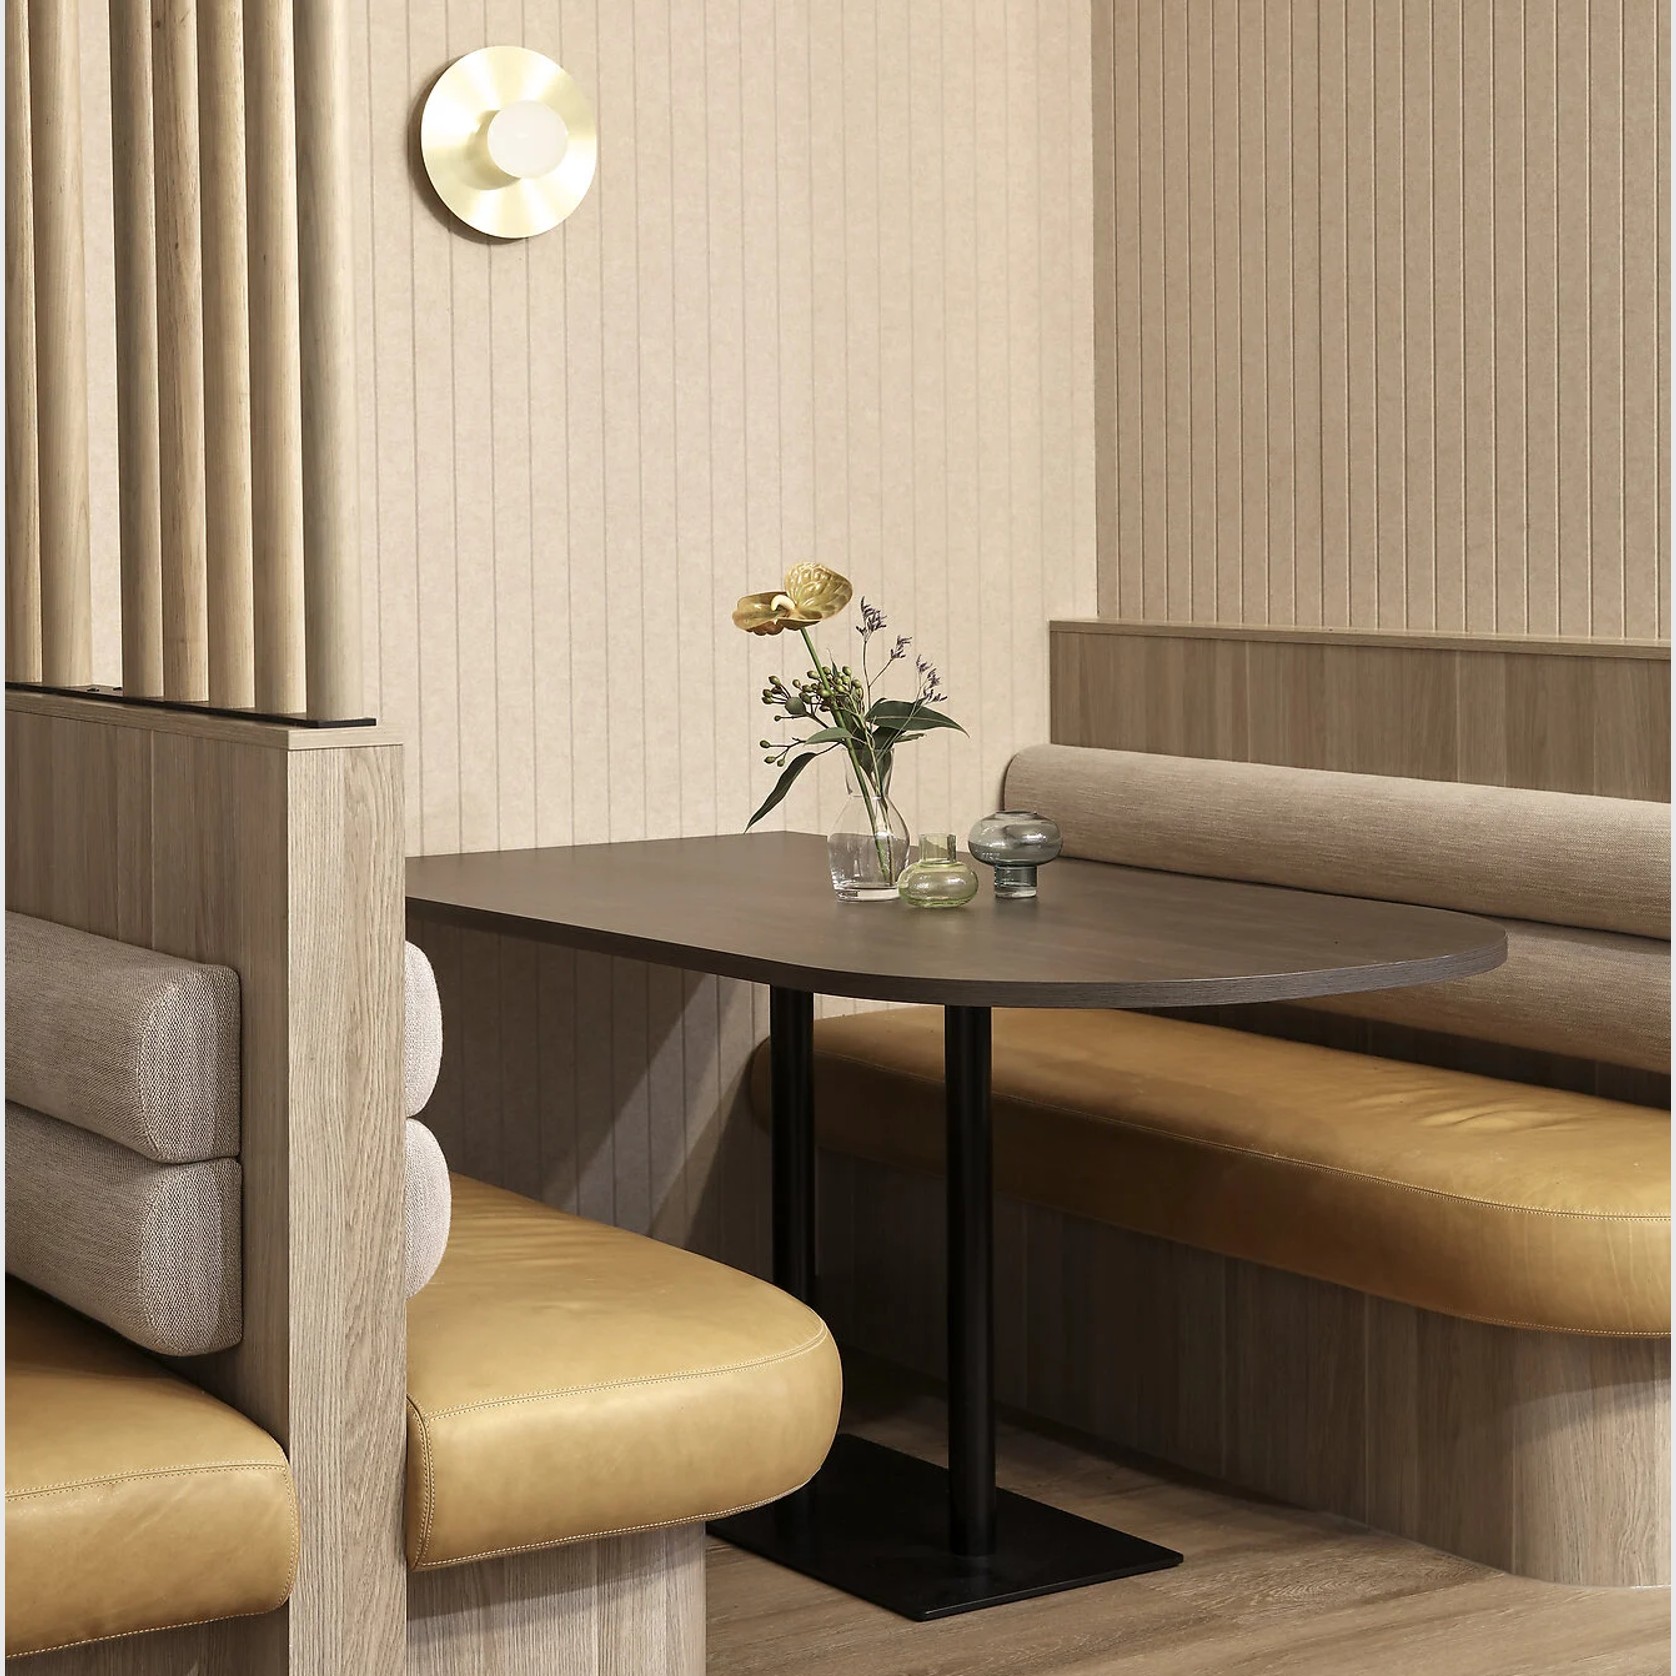 Banquette and Booth Seating gallery detail image